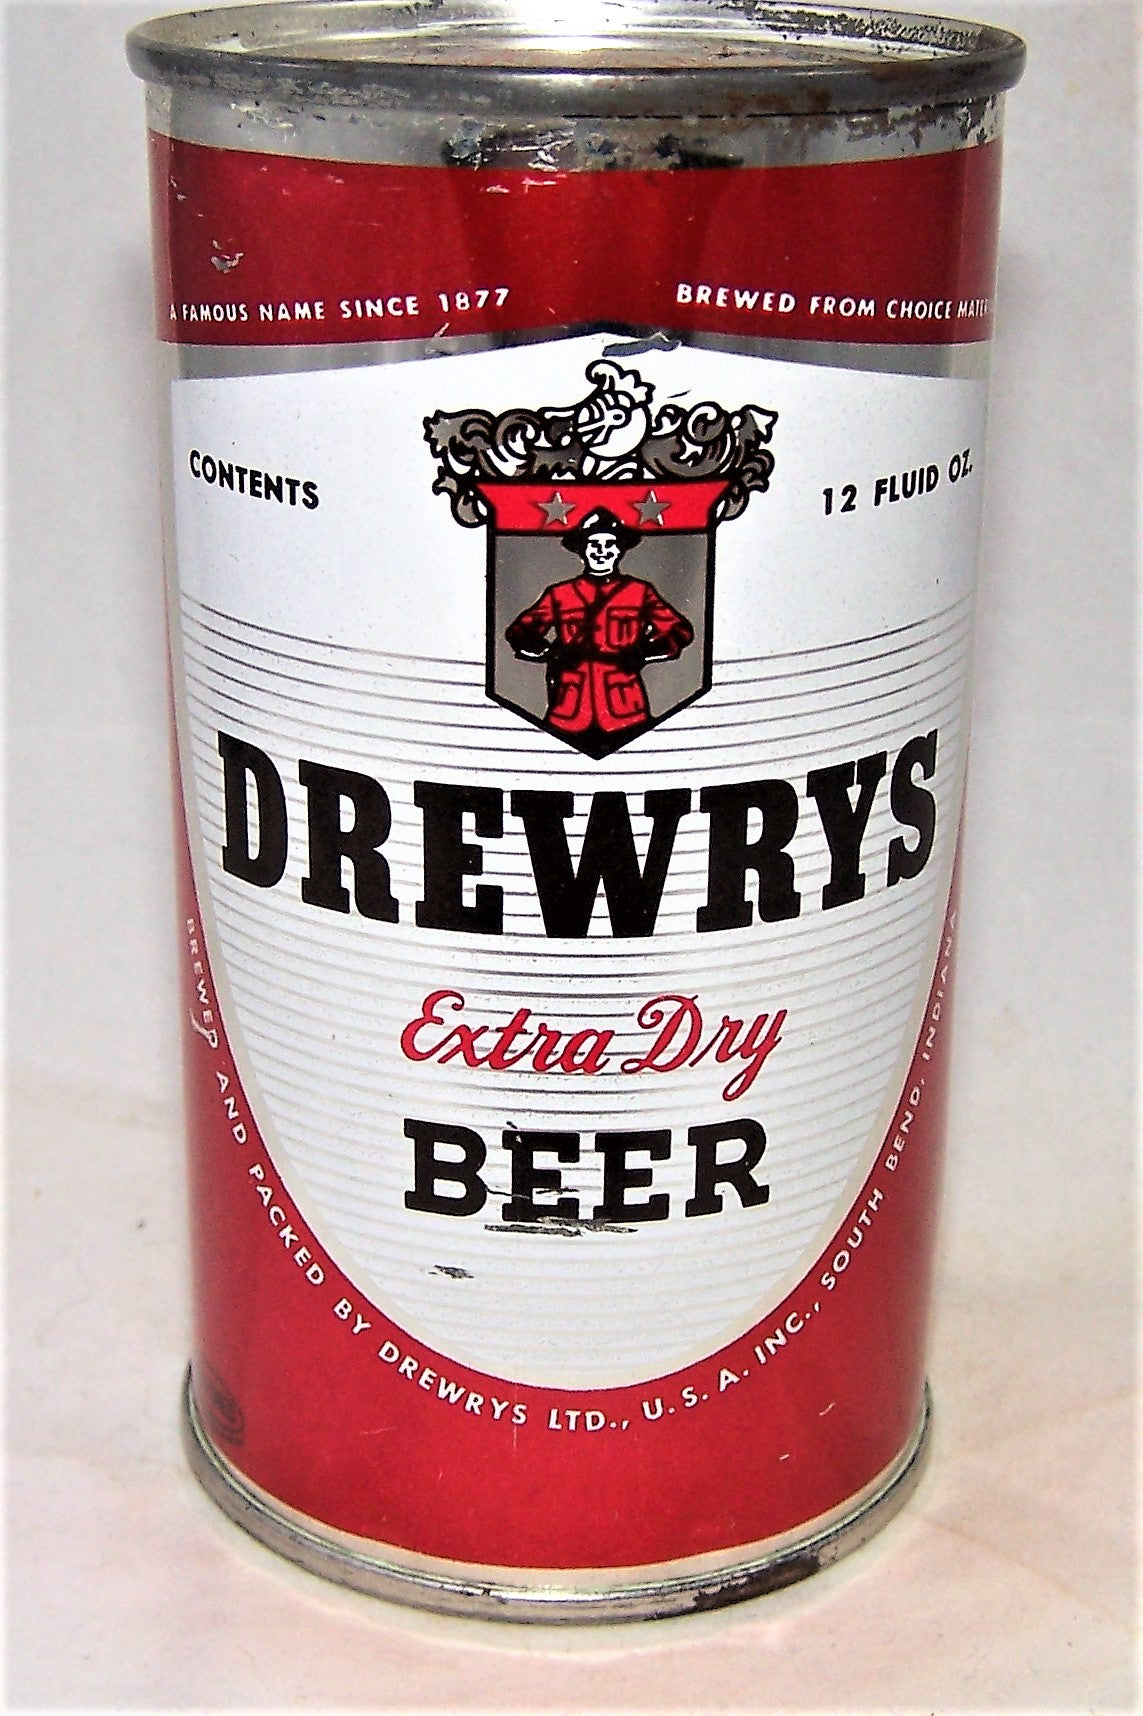 Drewrys Extra Dry (Your Character) USBC 56-39, Grade 1. Sold on 01/22/20